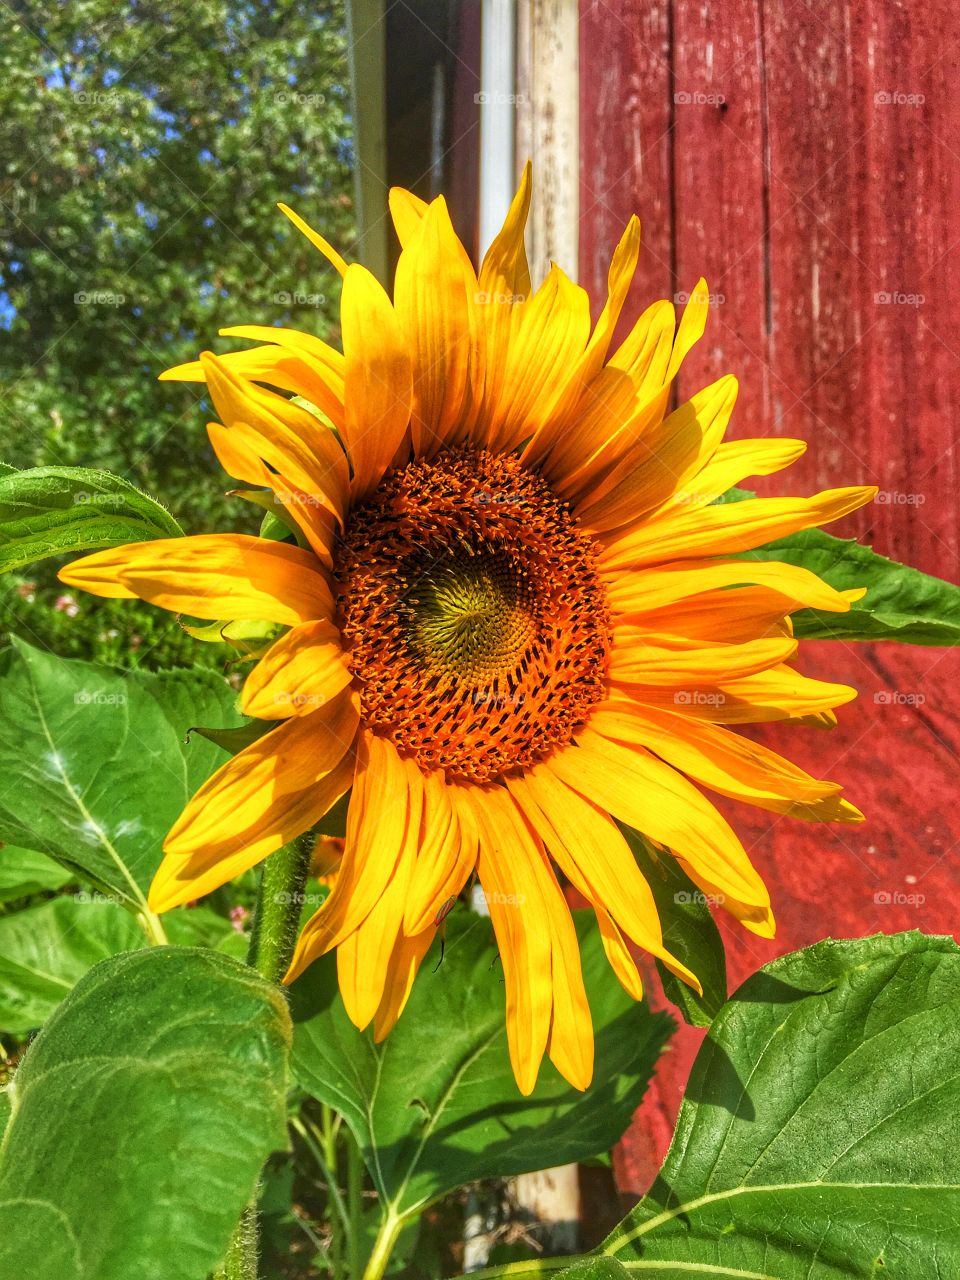 Sunflower in front of red barn